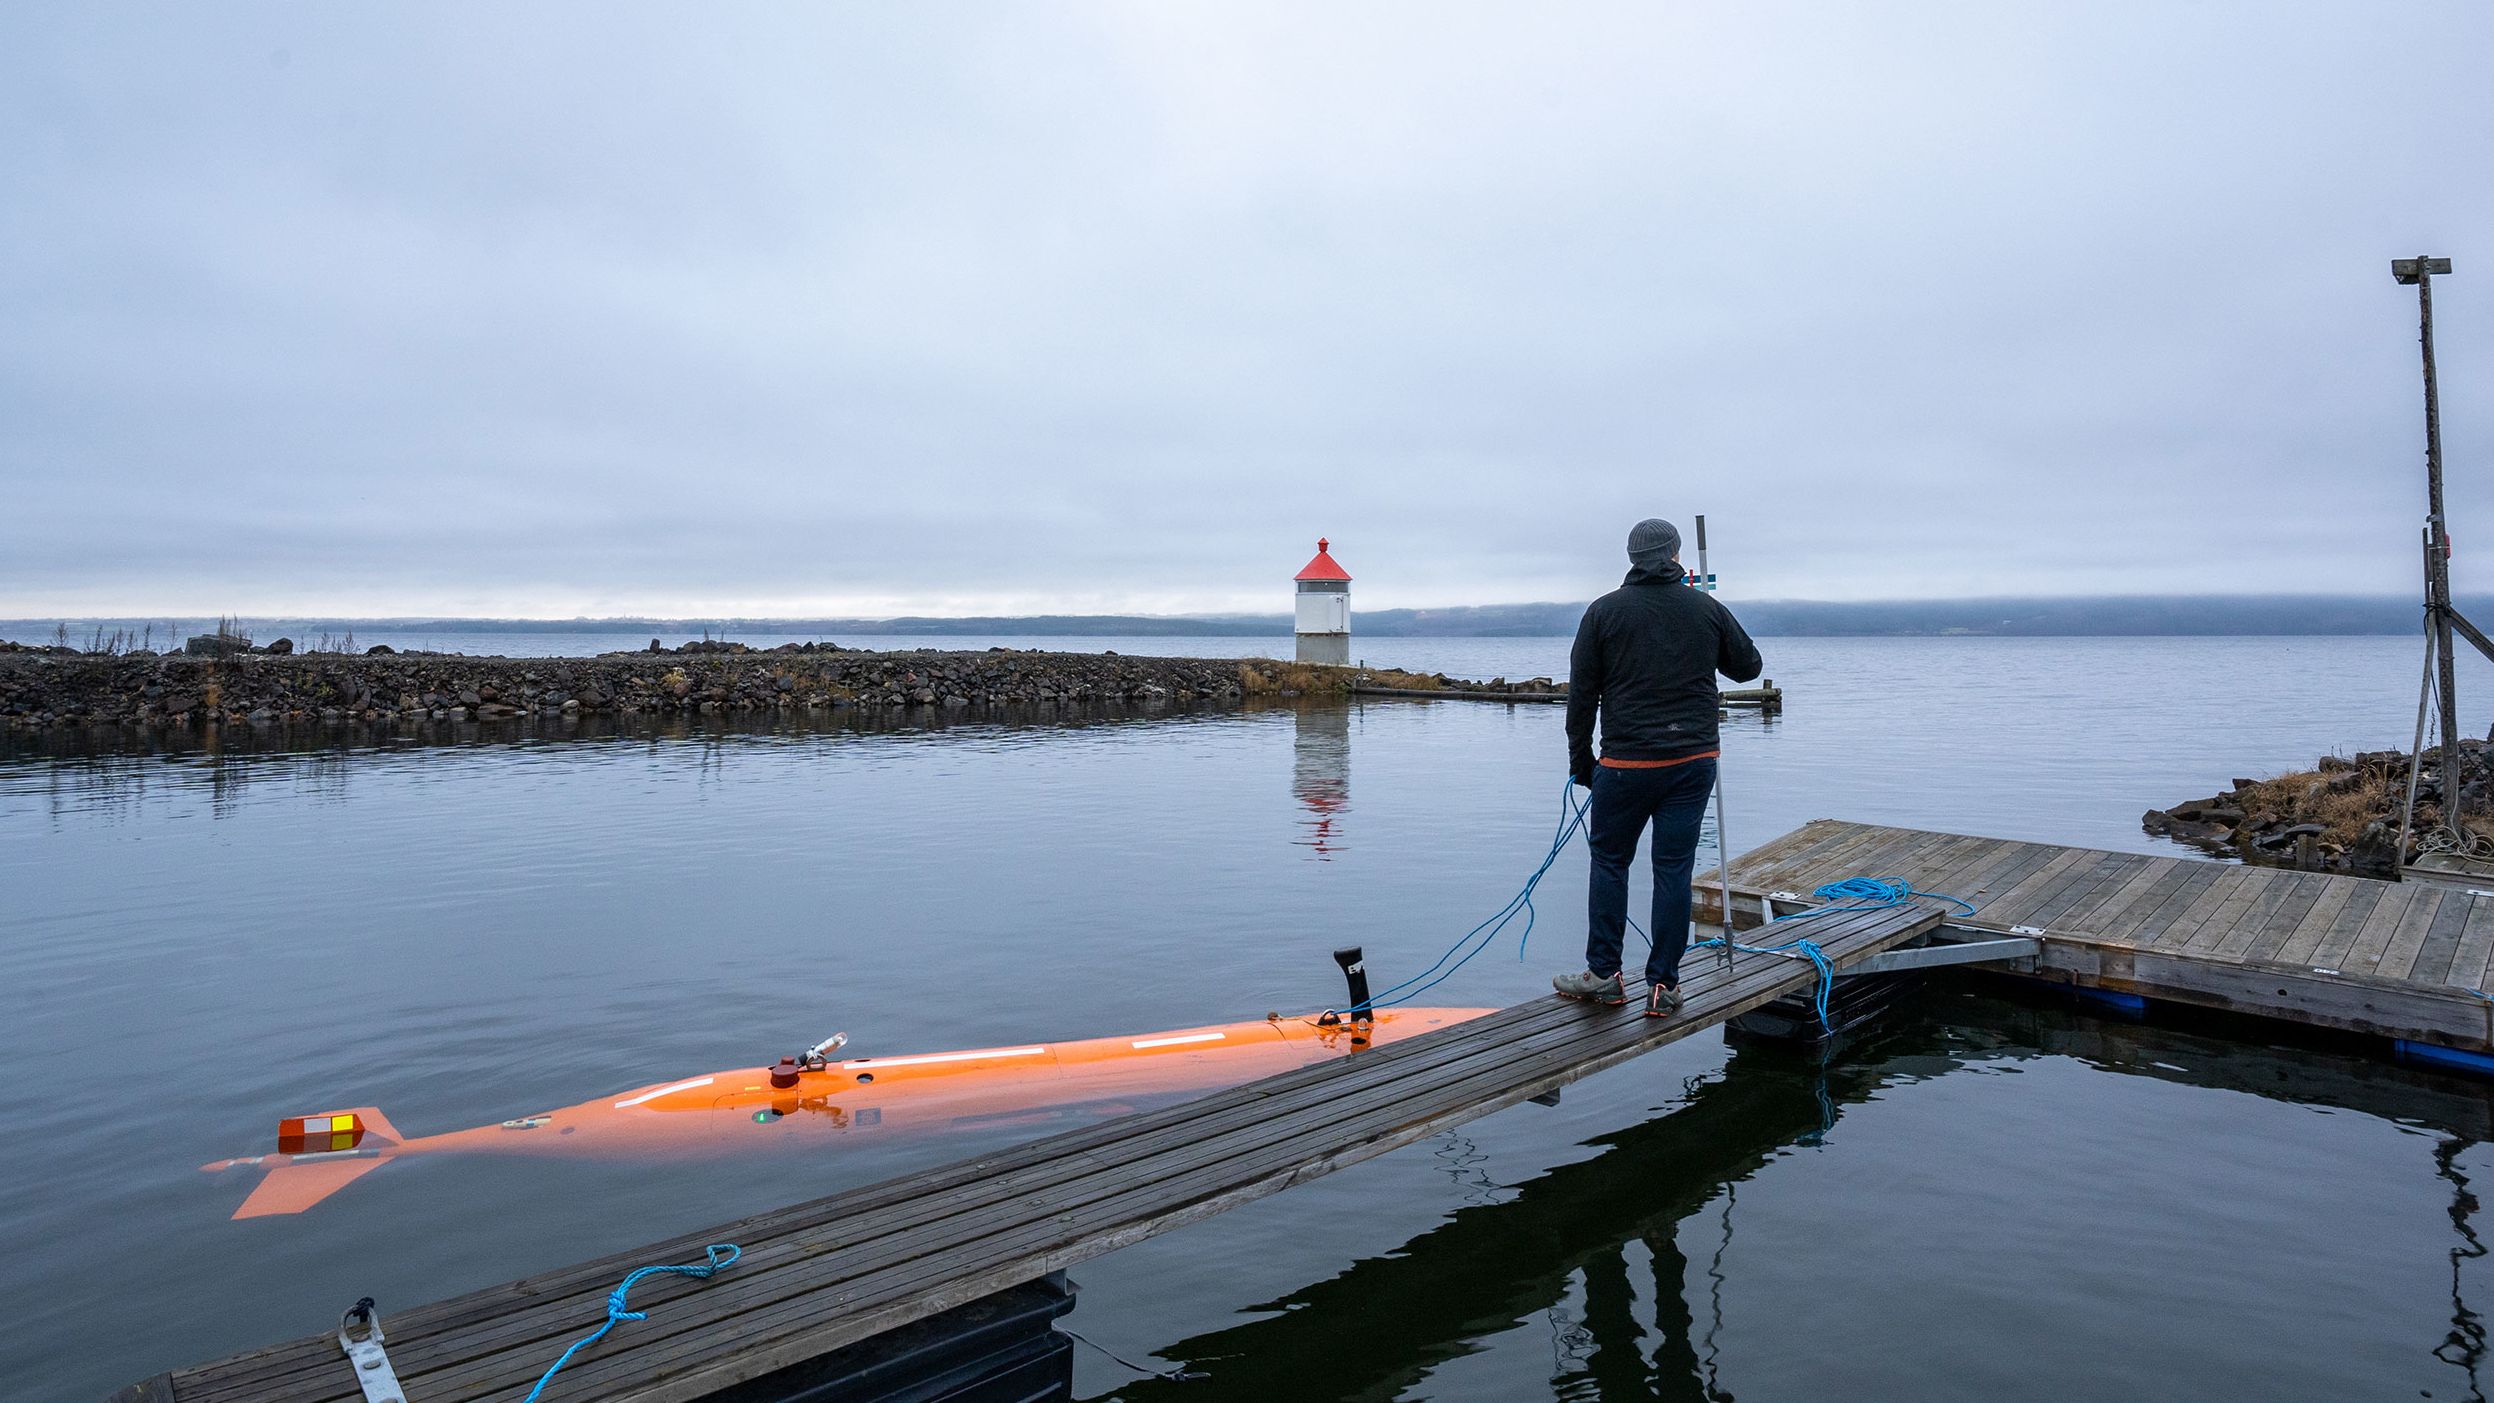 The autonomous underwater vehicle named Hugin (pictured) is being used for the first time in a freshwater environment to survey the lake bed of  Mjøsa in Norway.